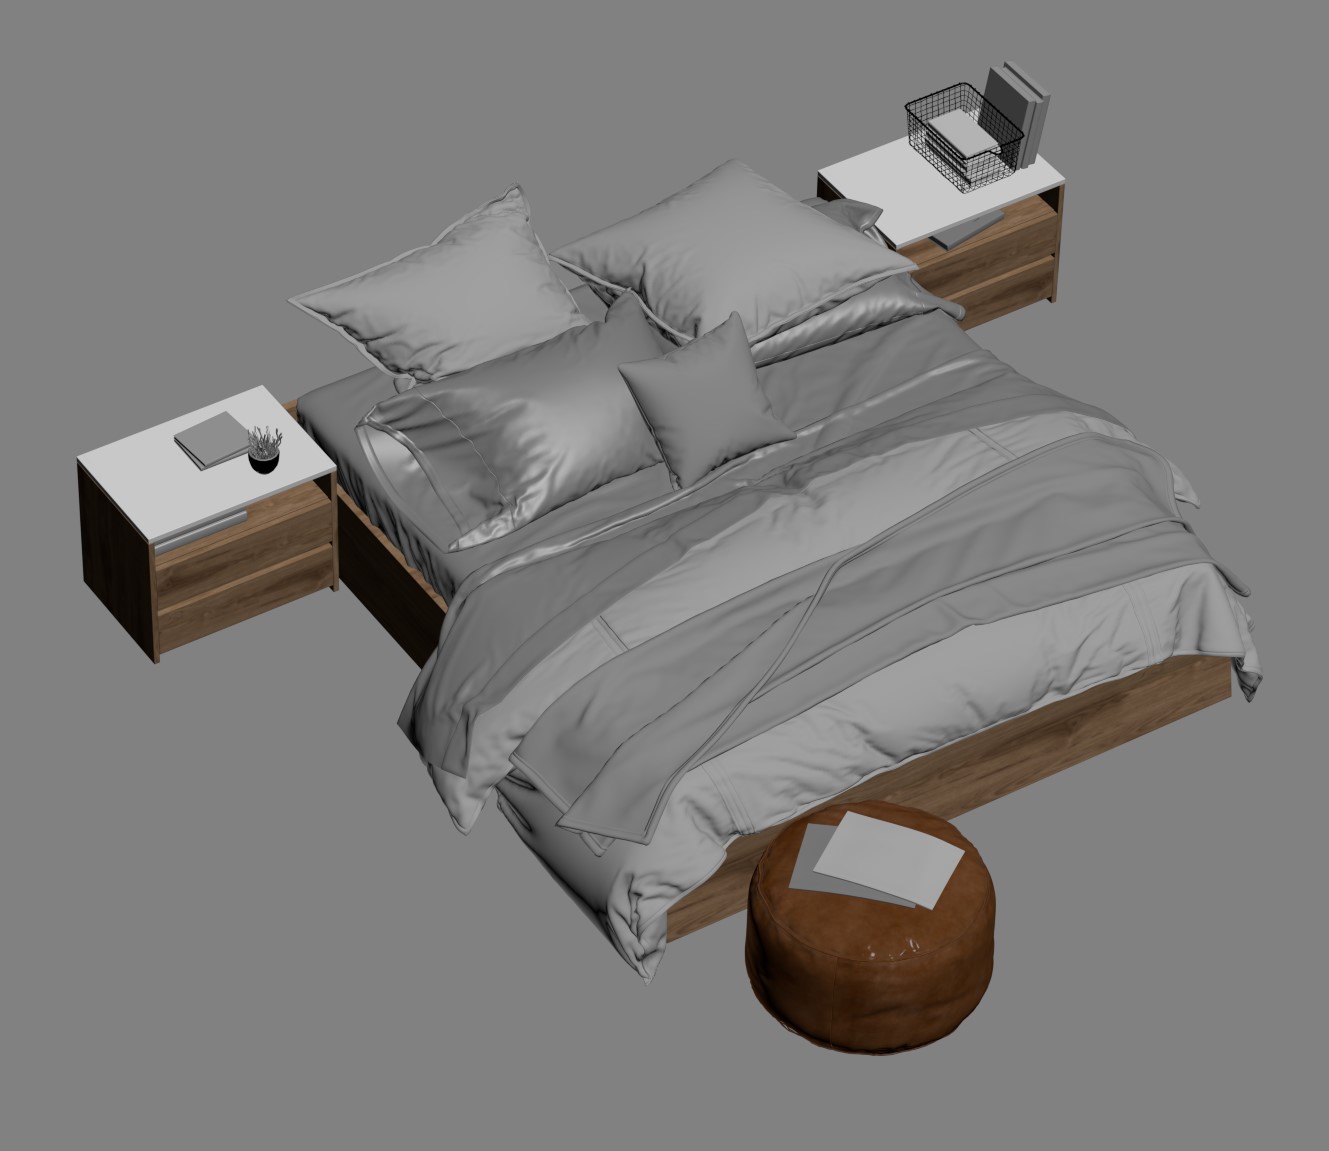 10468. Download Free Bed Model By Nam Do